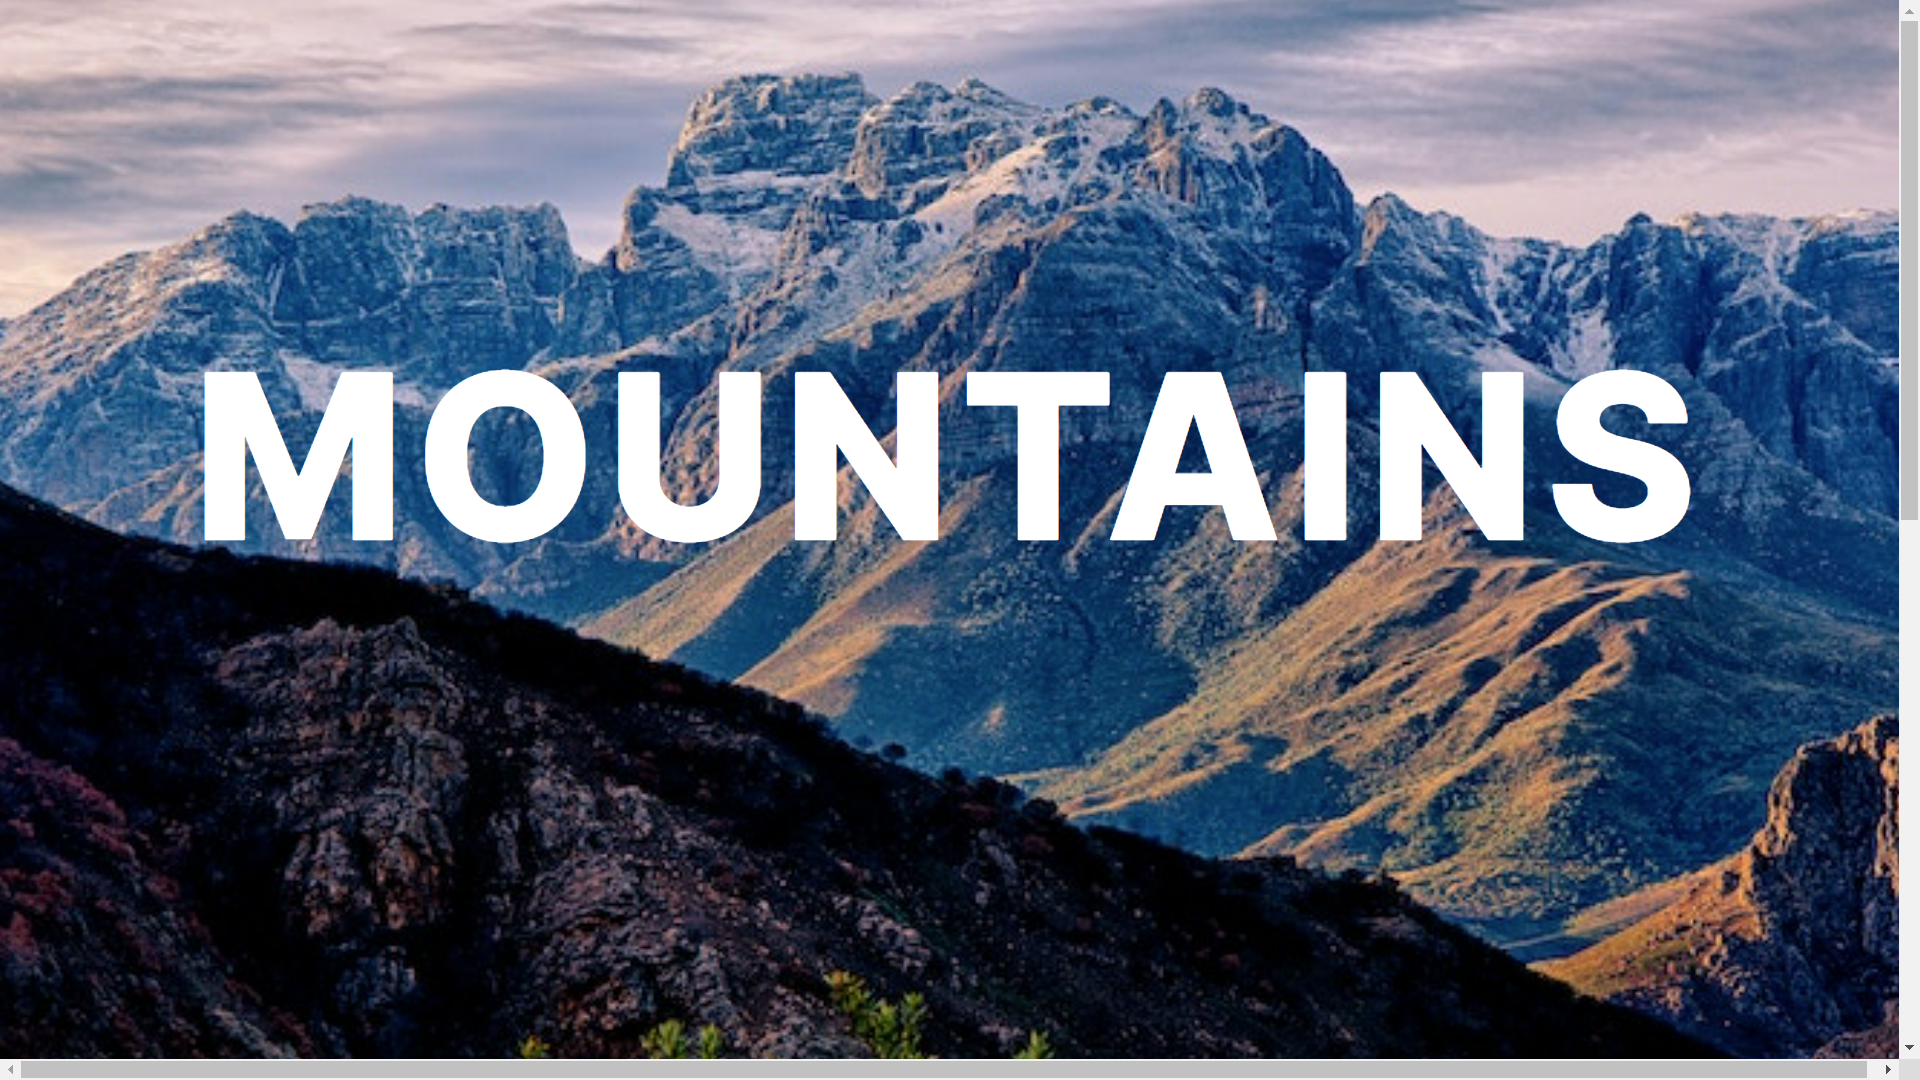 Night on the Mountain Parallax Scrolling Effect